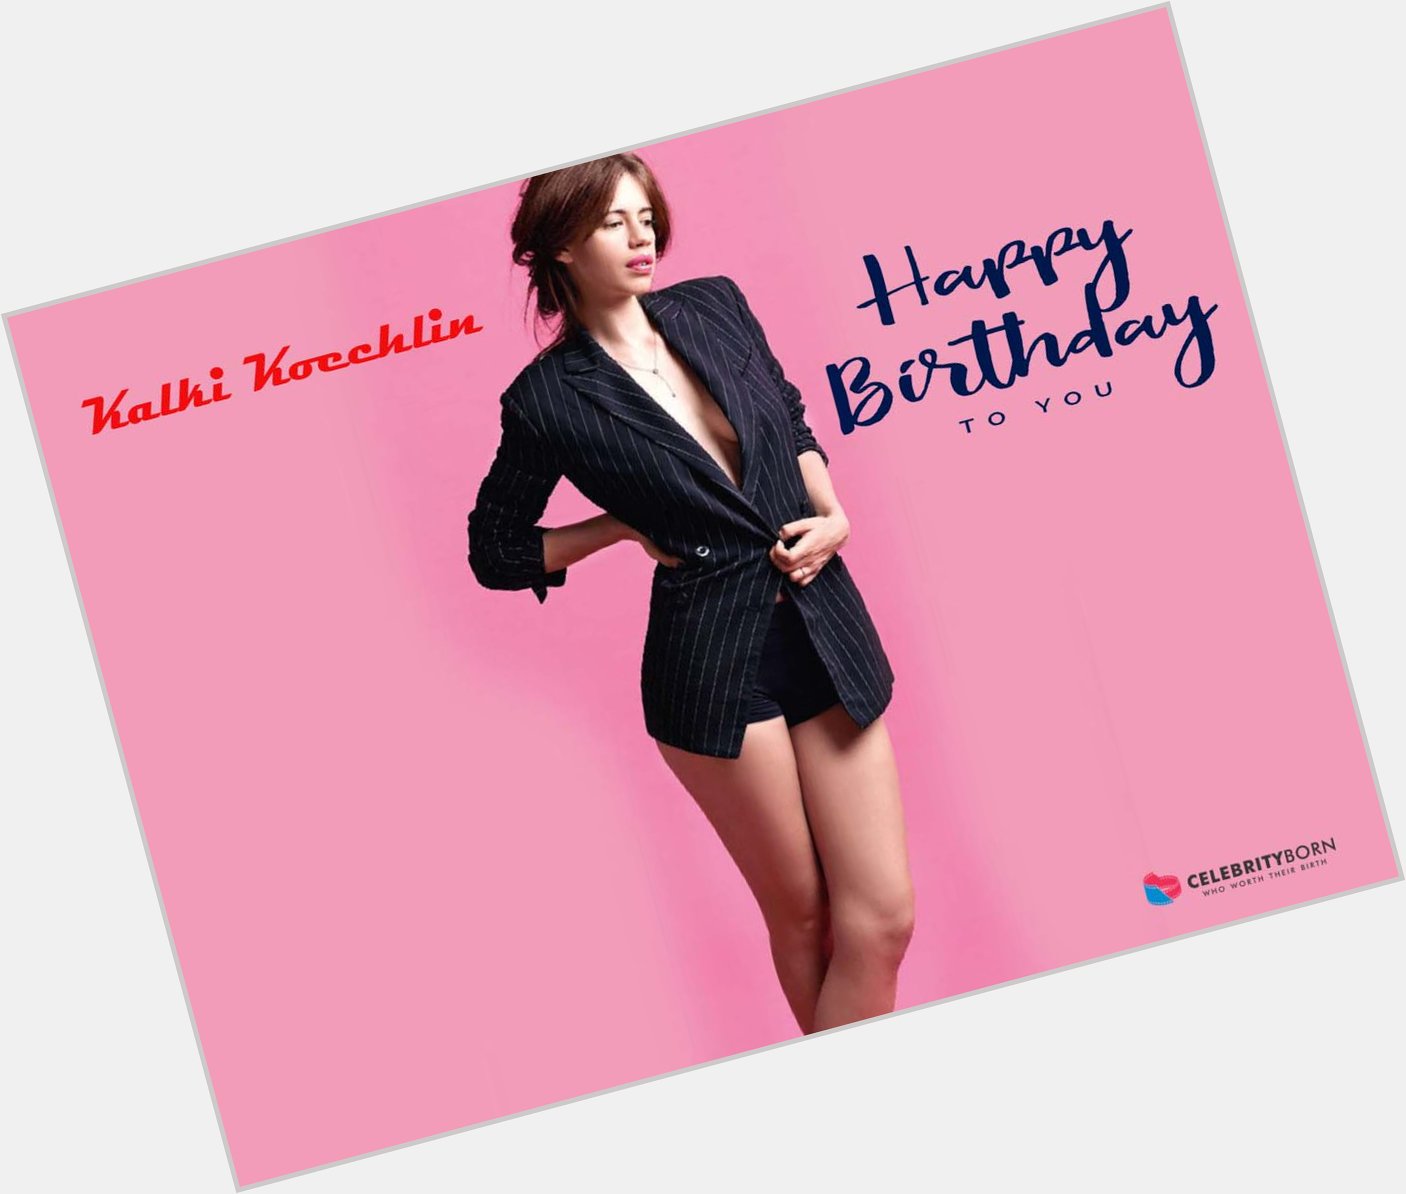 She fits in every outfit..
The Beautiful Happy Birthday Kalki Koechlin   